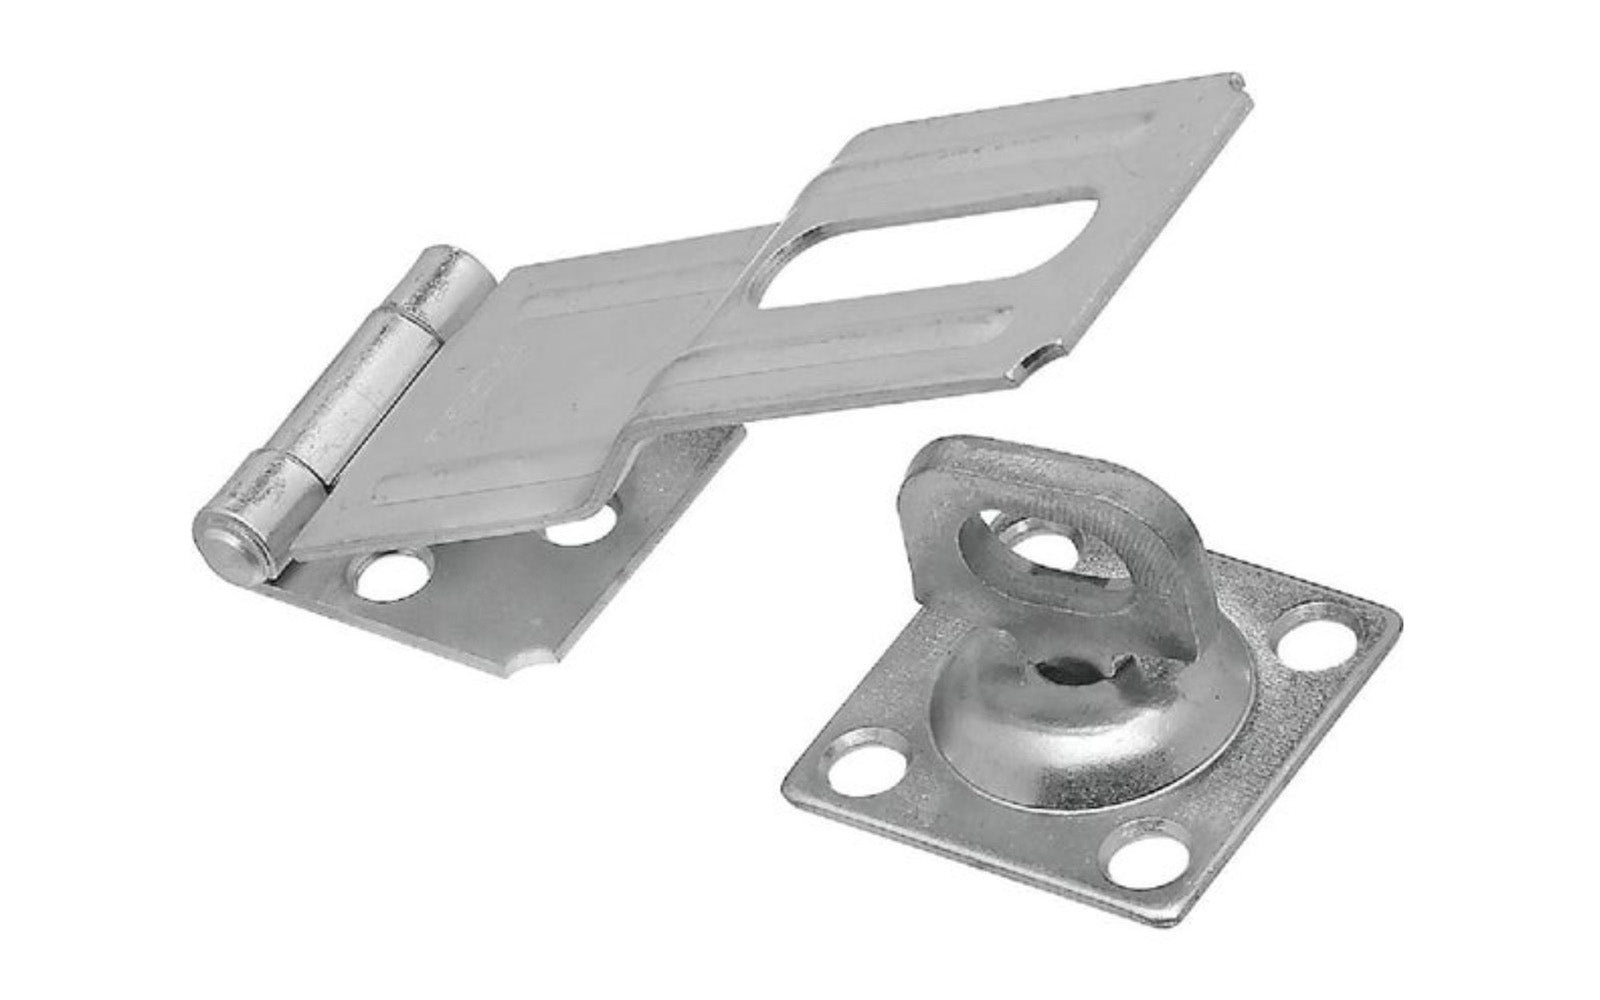 4-1/2" zinc-plated swivel safety hasp is designed to secure a wide variety of cabinets, small doors, boxes, trunks, & more. For security, all screws are concealed when hasp is closed. Includes swivel staple. National Hardware Model N102-921. 038613102927. Plated to withstand weather conditions & prevent corrosion.